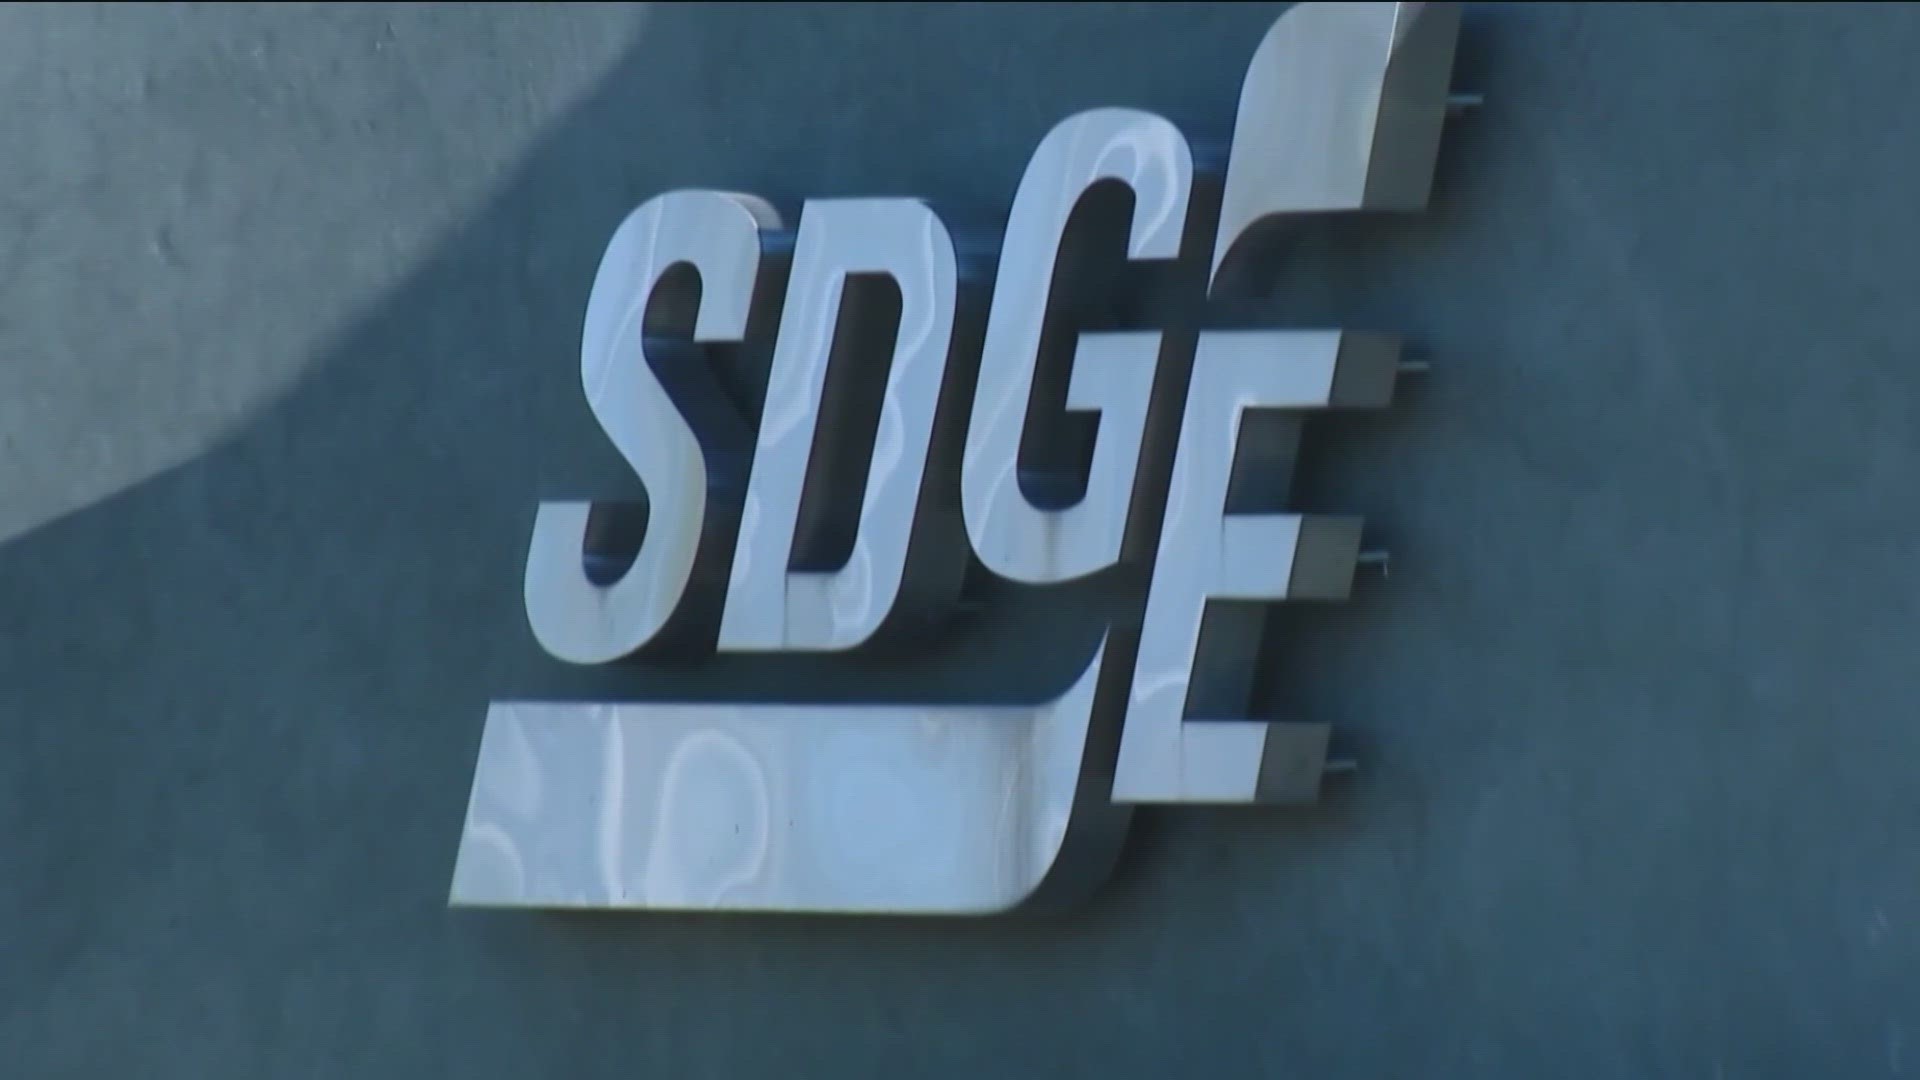 One estimate was based on city of San Diego reports. The other was paid for by SDG&E.